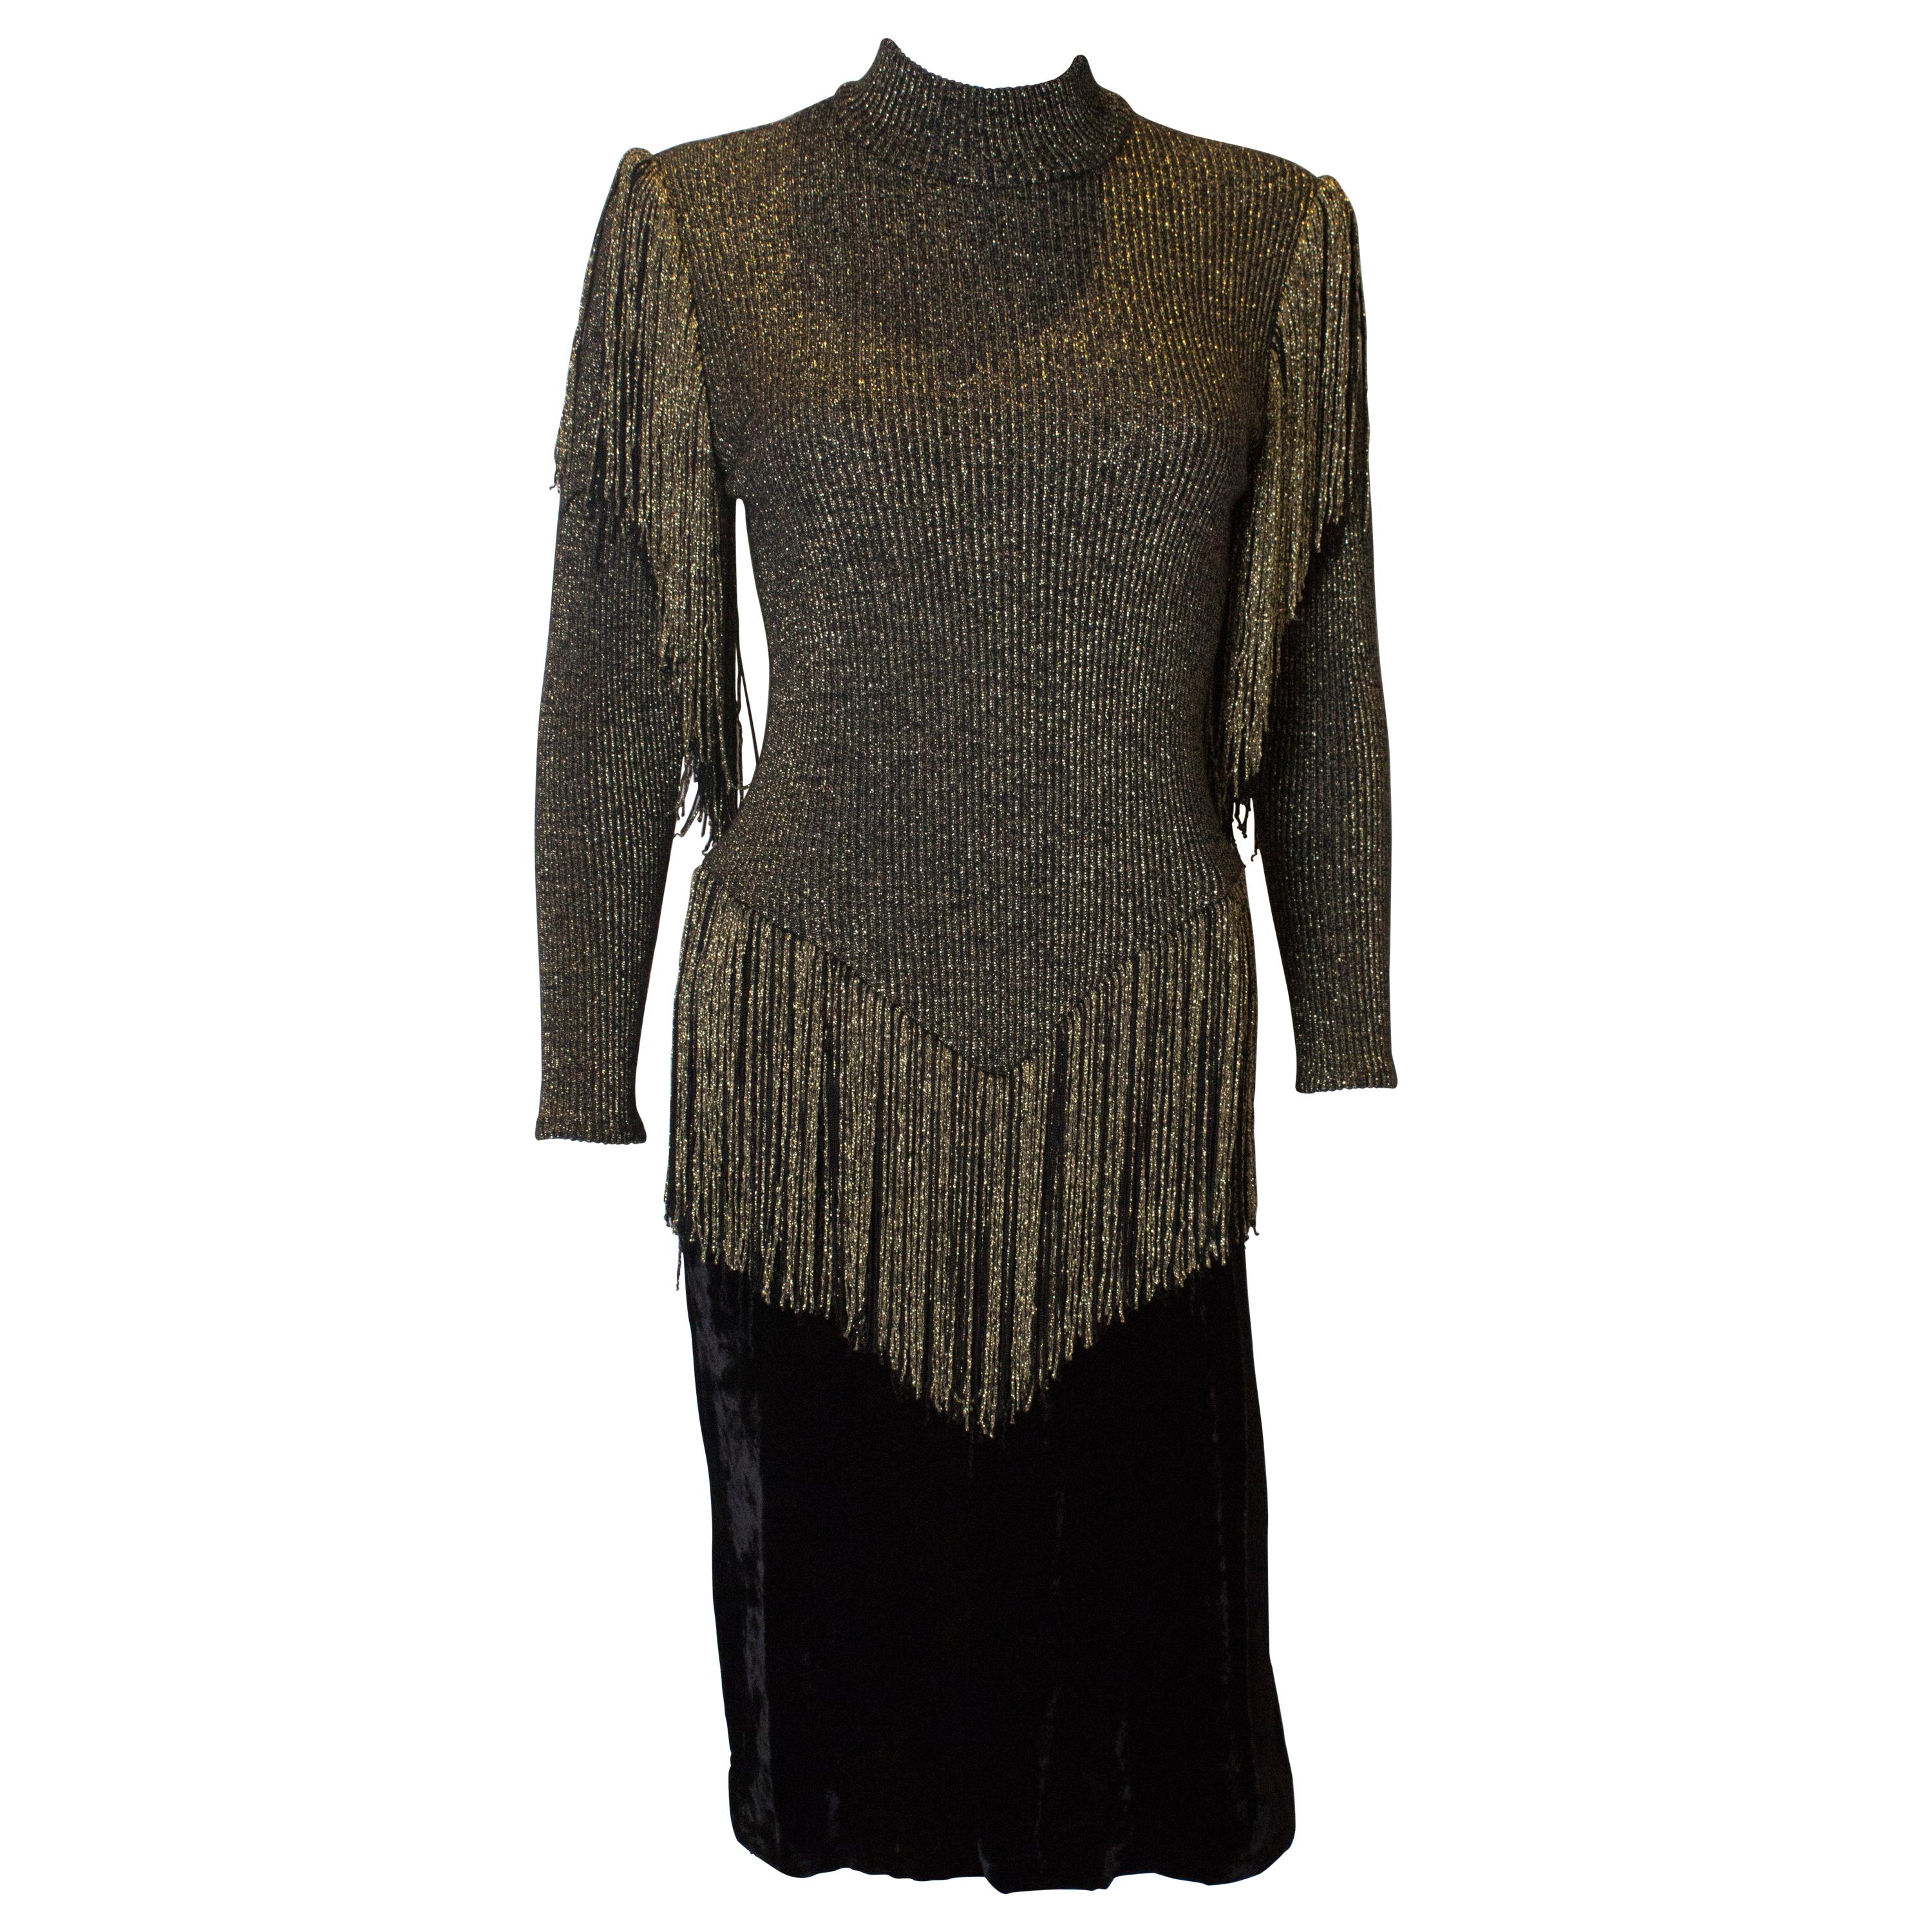 Vintage Gold and Black Party Dress with Fringing